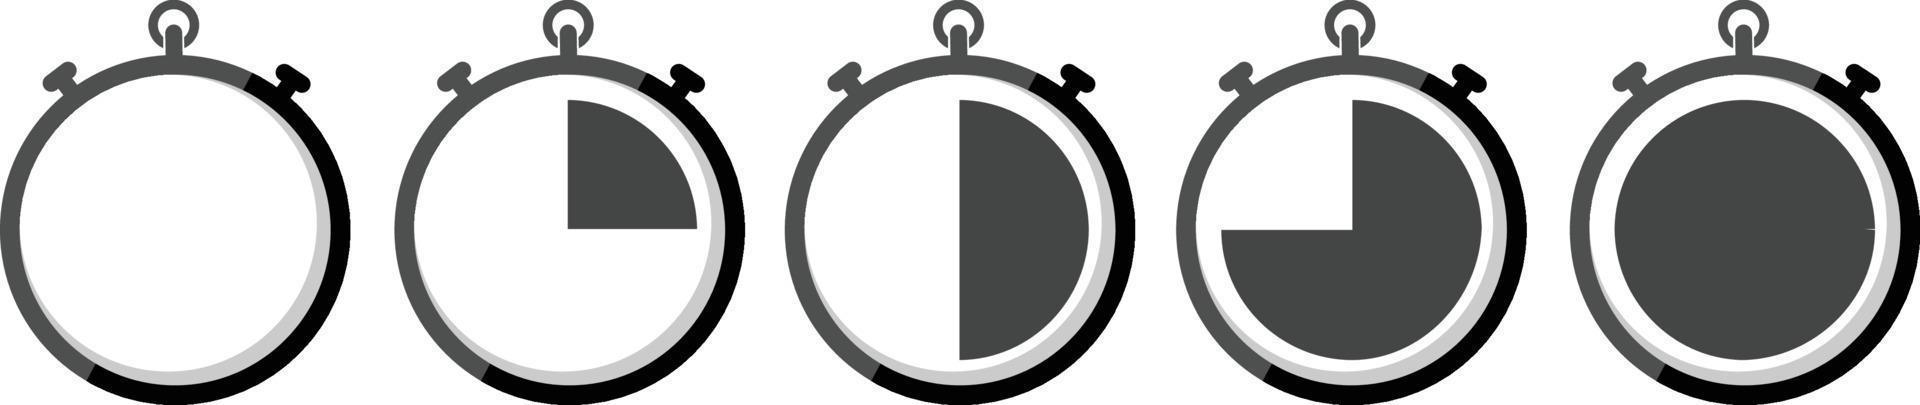 Set of timer icon isolate on white background. vector